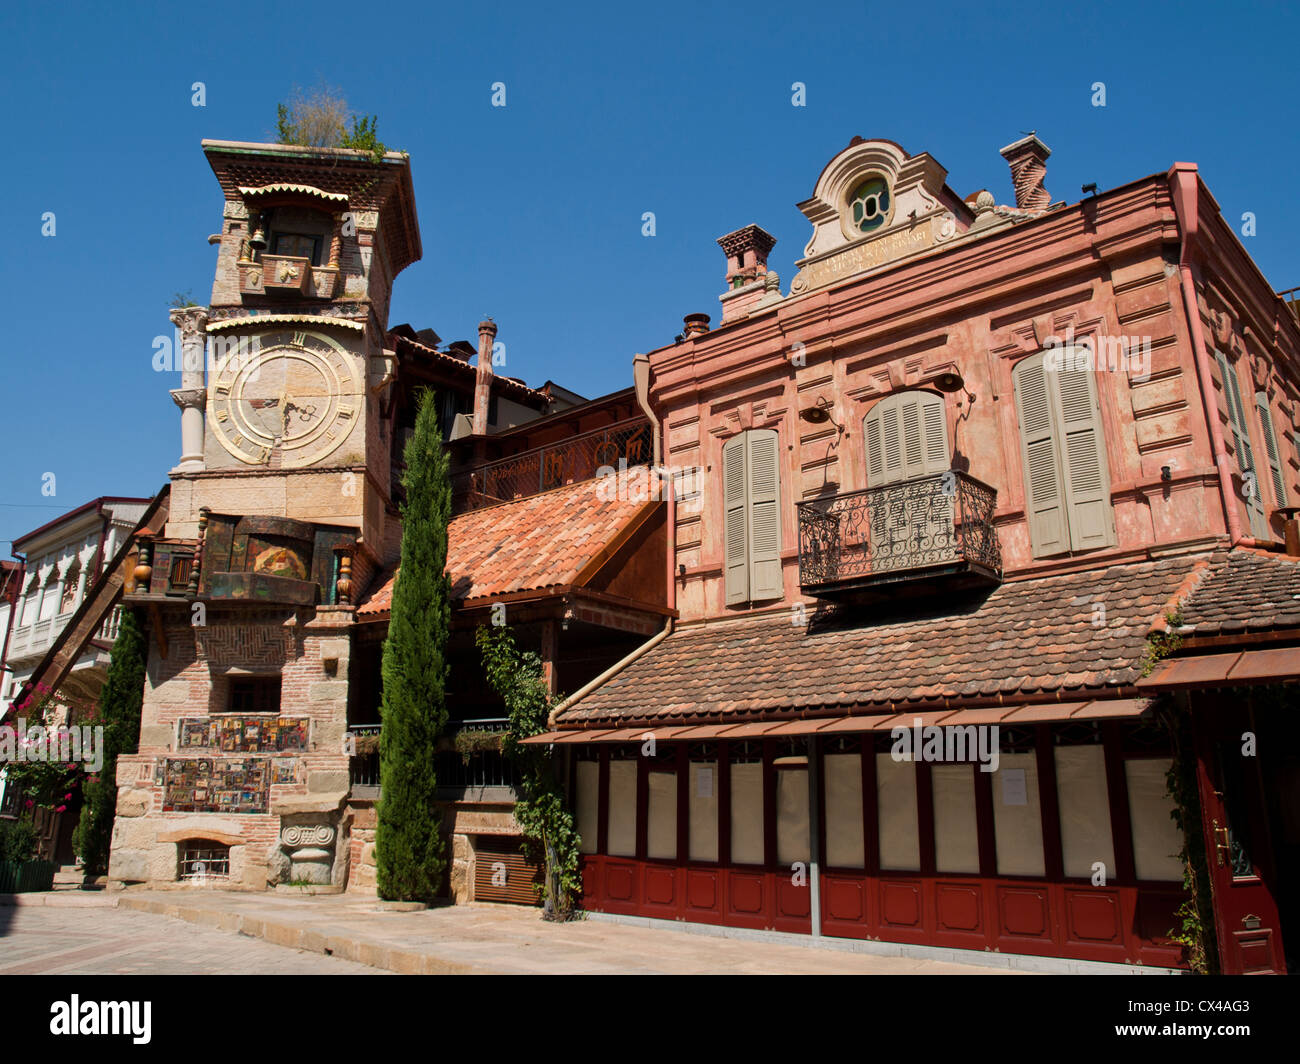 Puppet theater and clock tower in Tbilisi Stock Photo